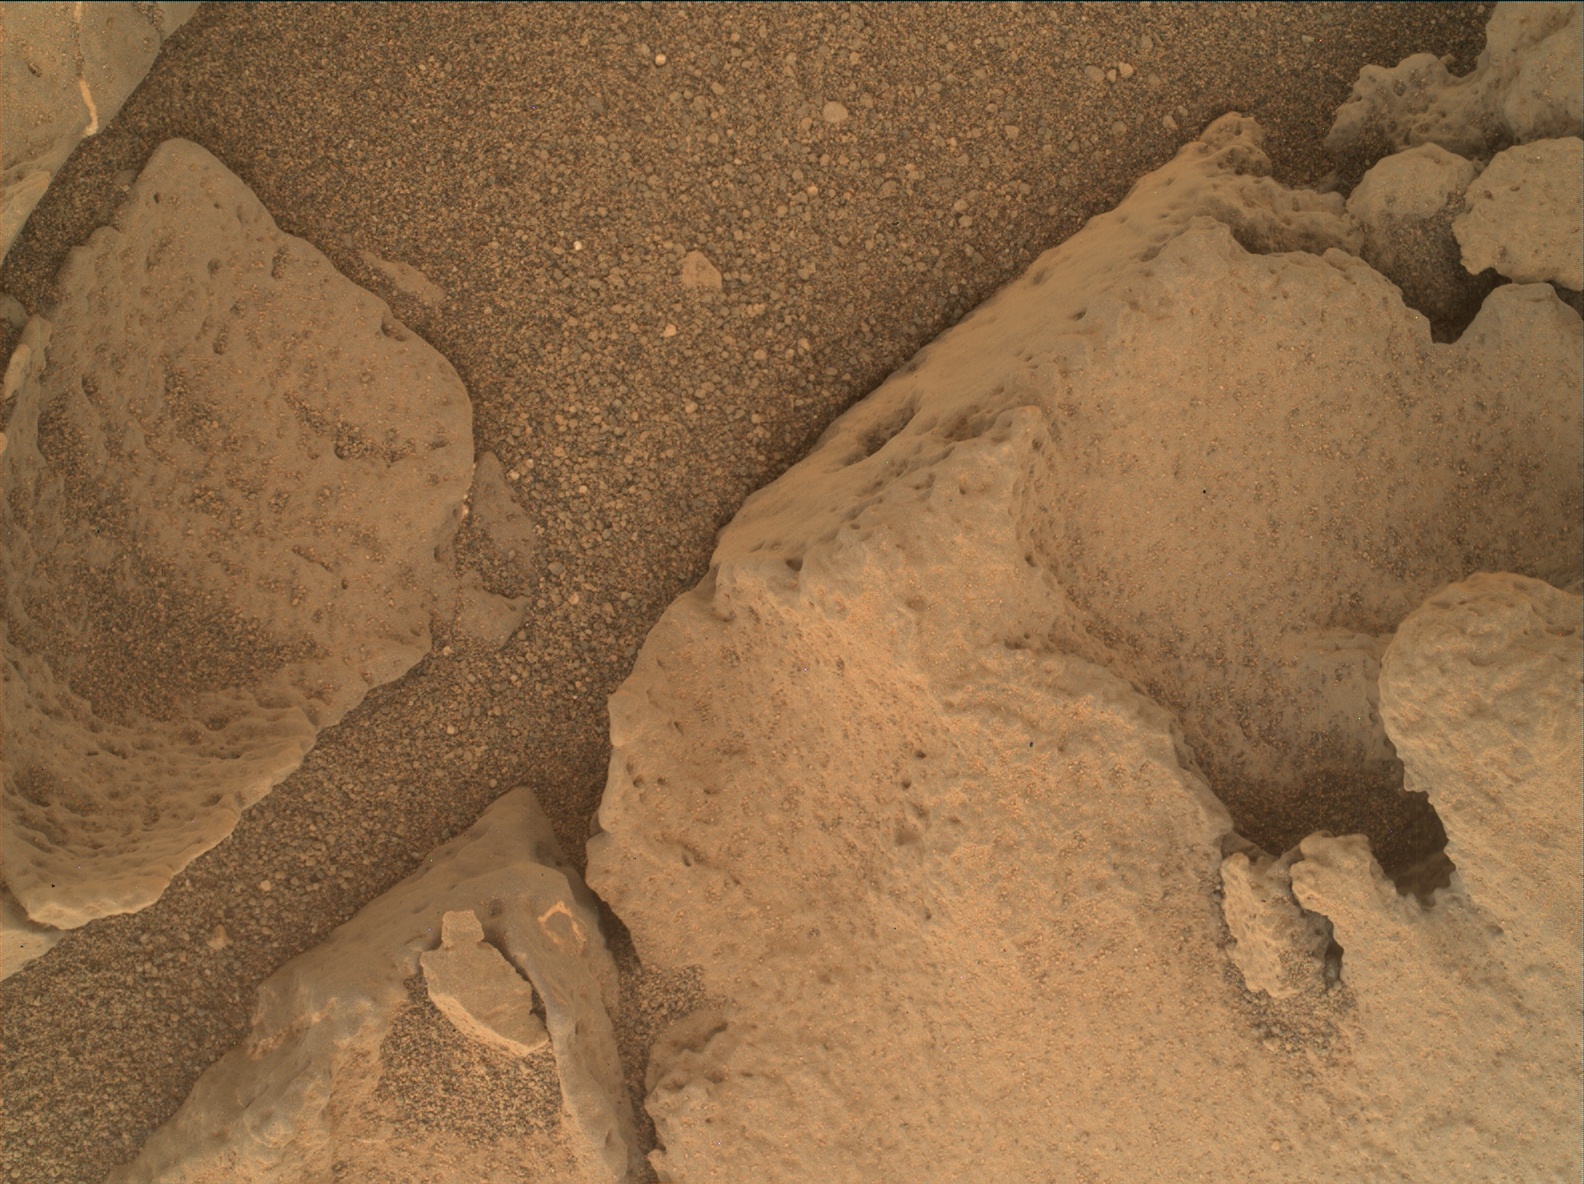 Nasa's Mars rover Curiosity acquired this image using its Mars Hand Lens Imager (MAHLI) on Sol 1371